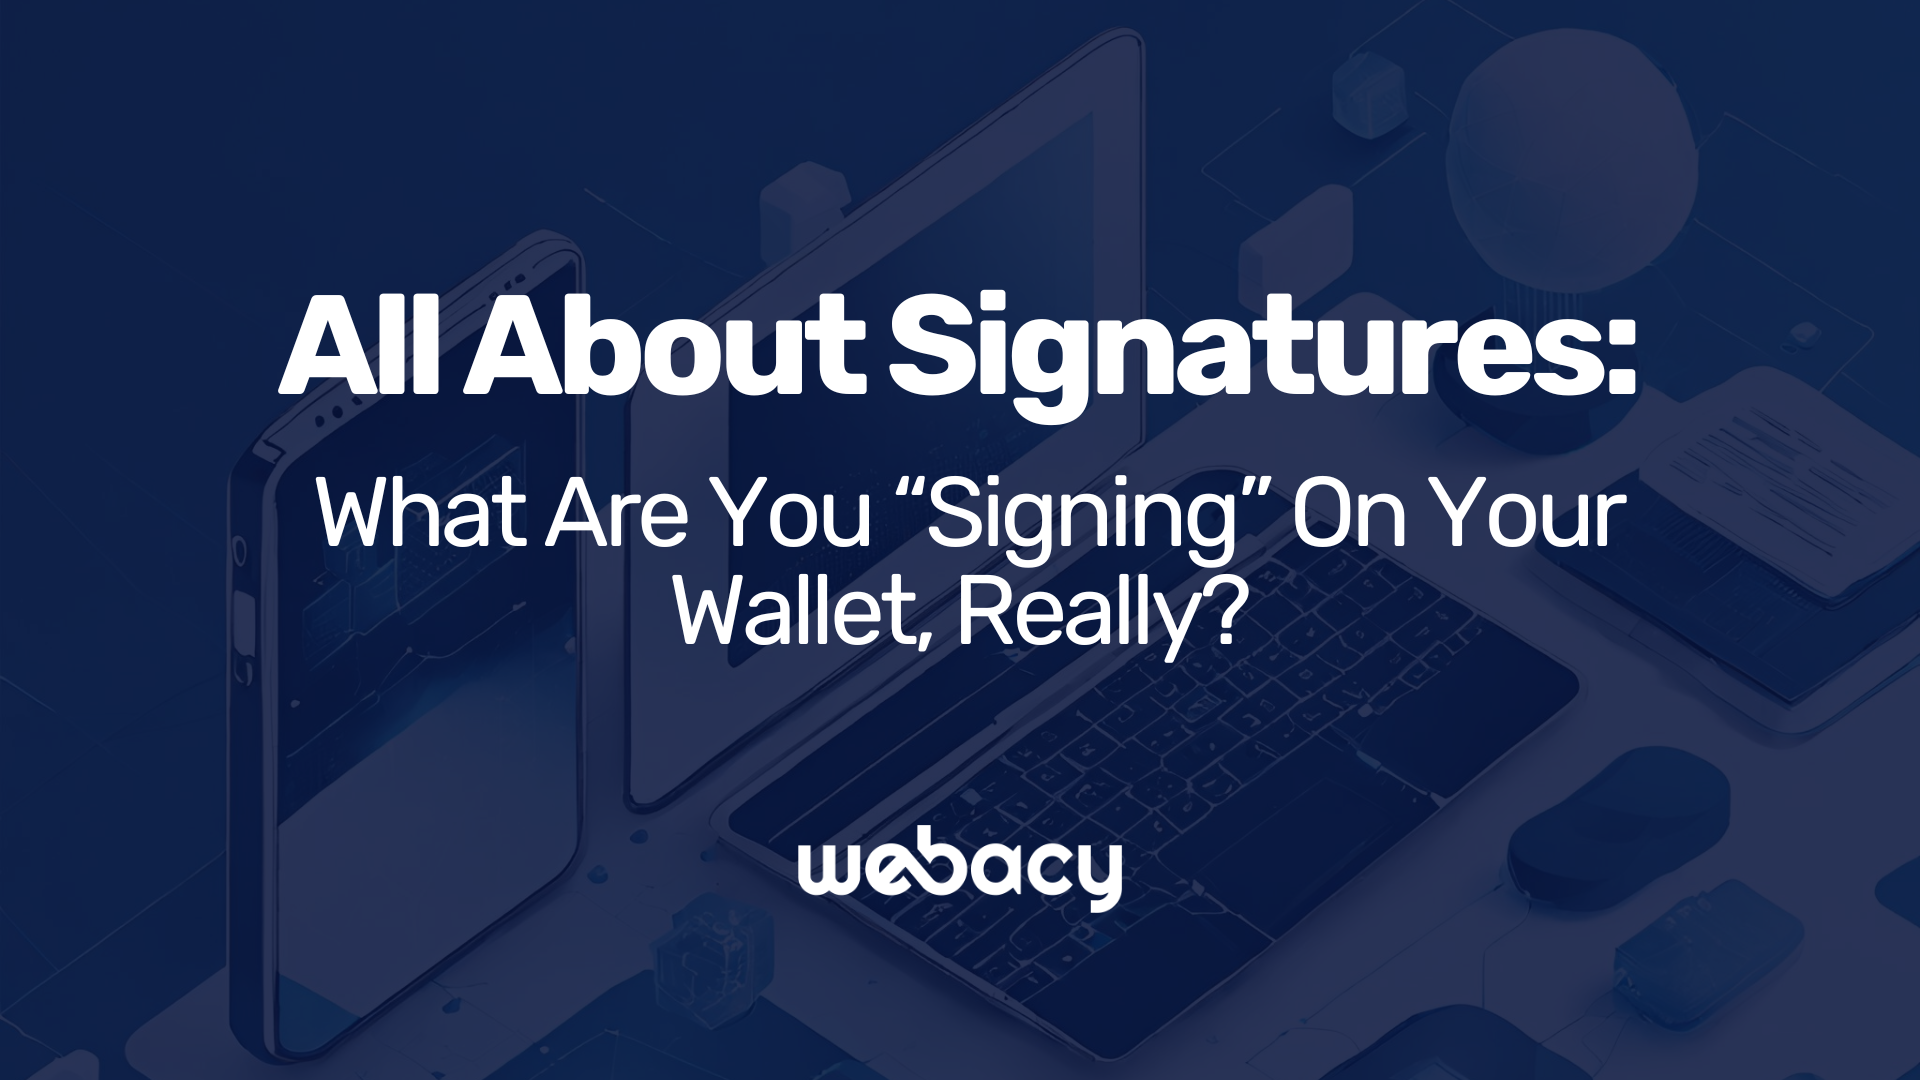 All About Signatures: What Are You “Signing” On Your Wallet, Really?